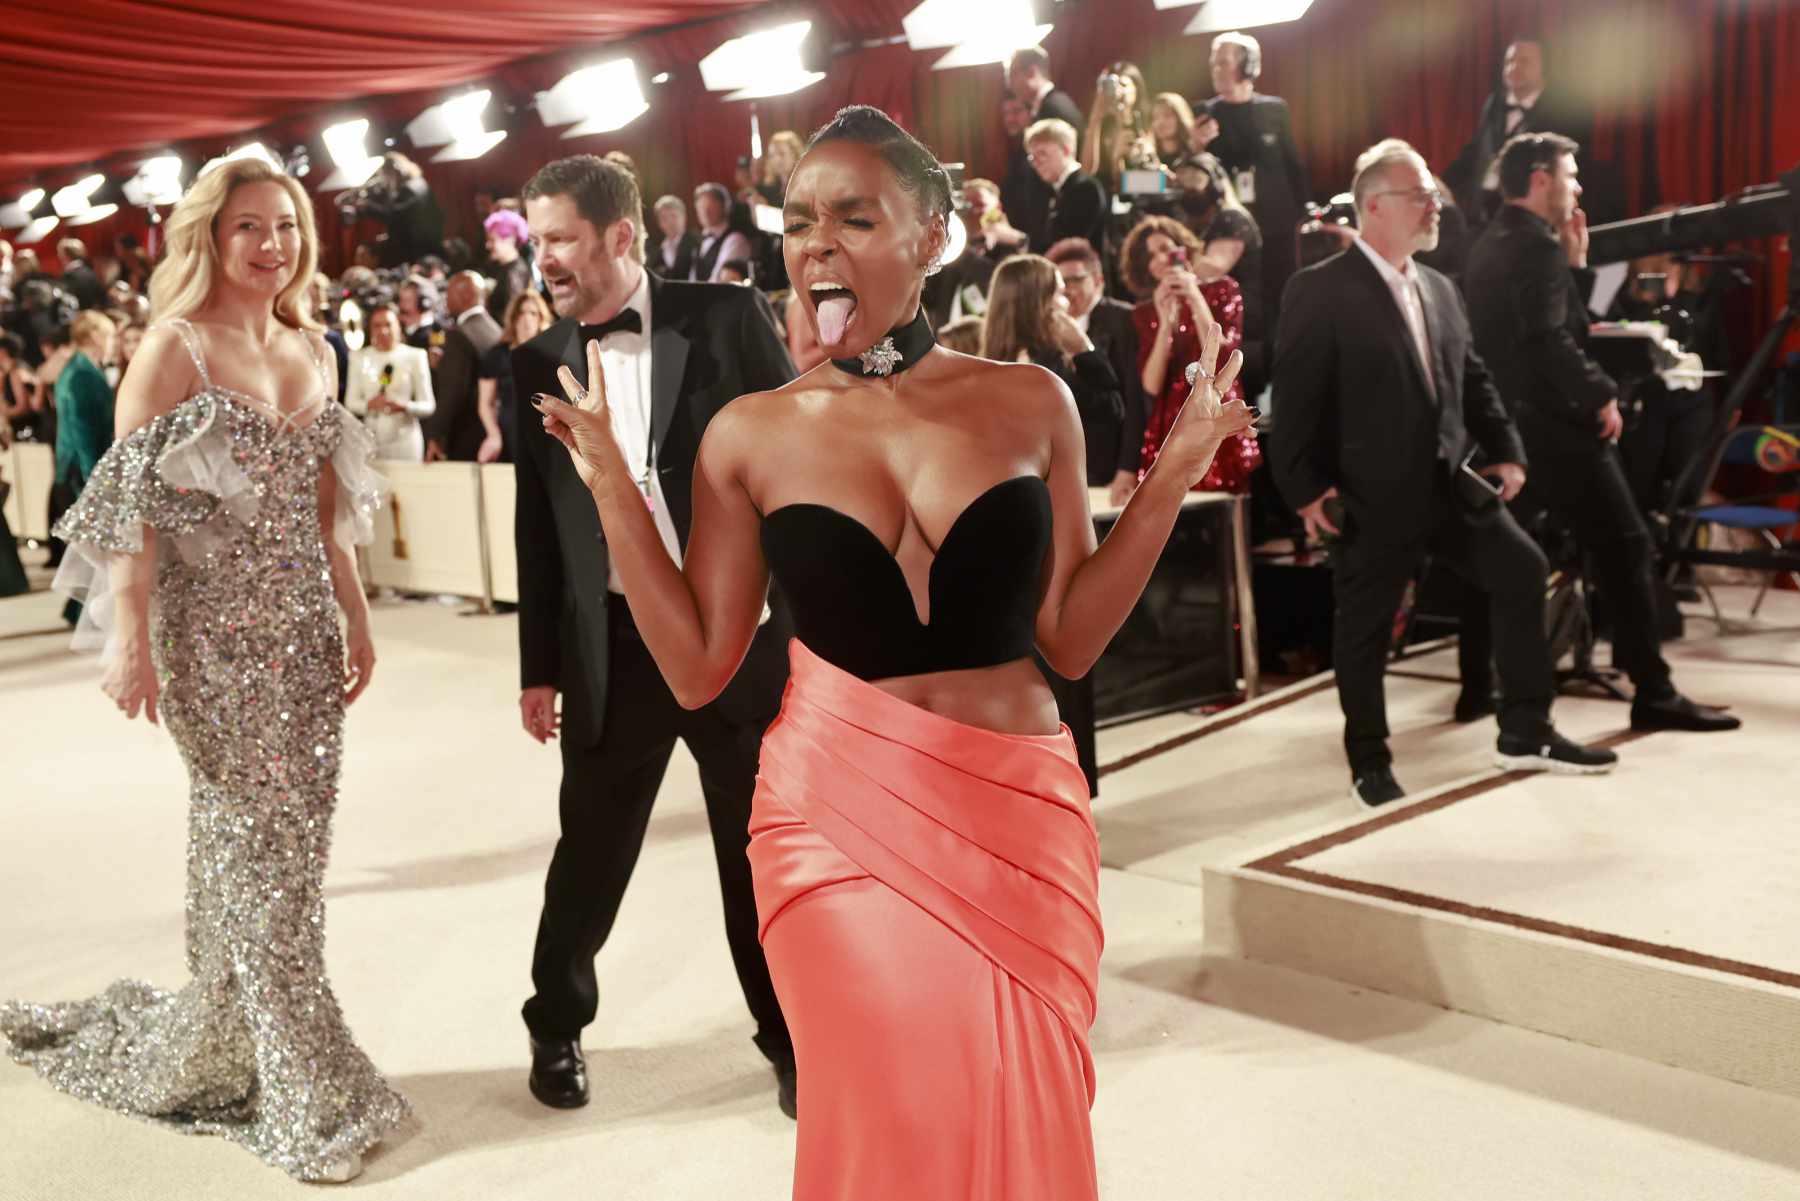 Janelle Monae Flashing Her Boobs Is a Good Thing